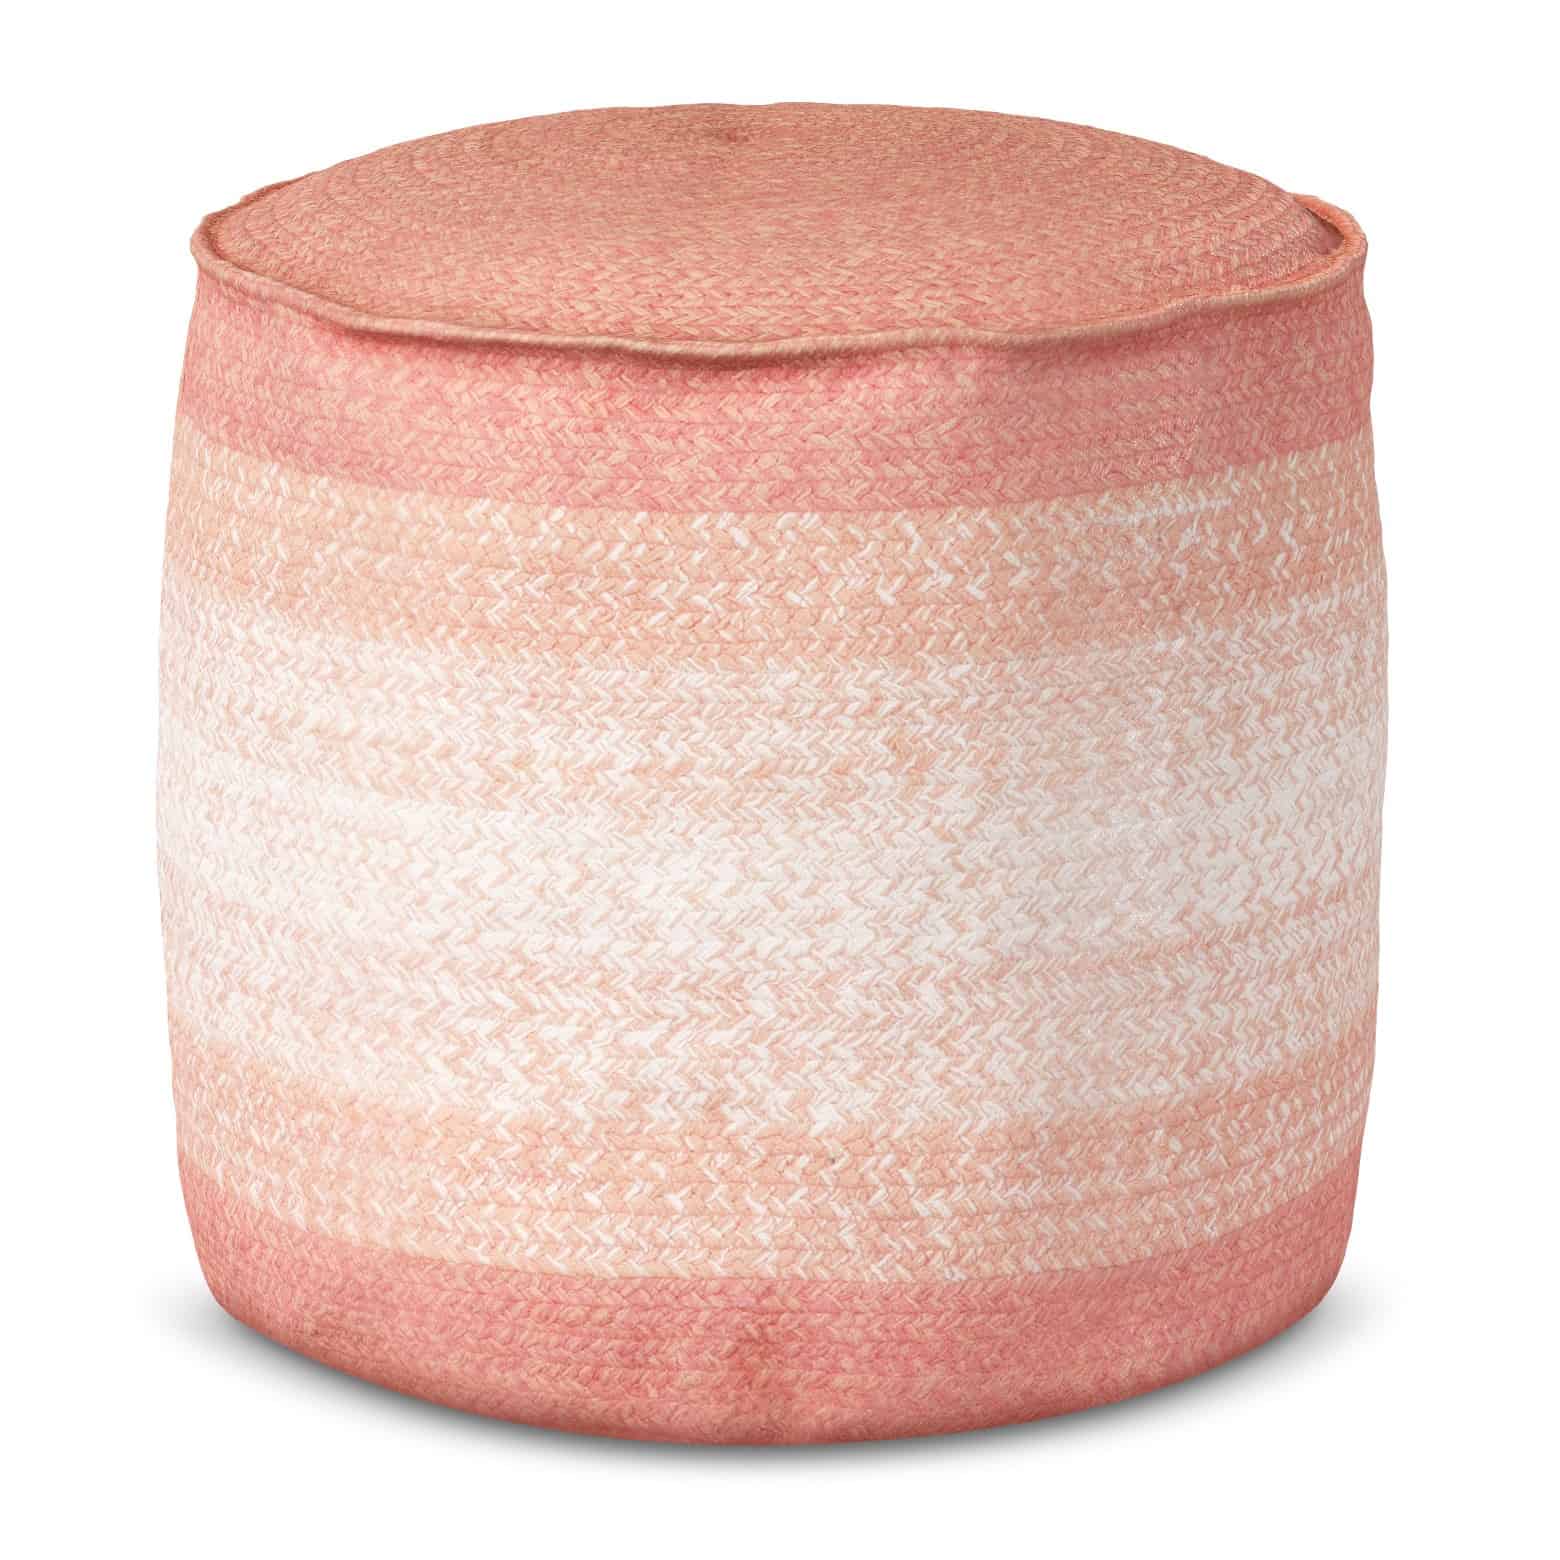 Braided peach pouf from target